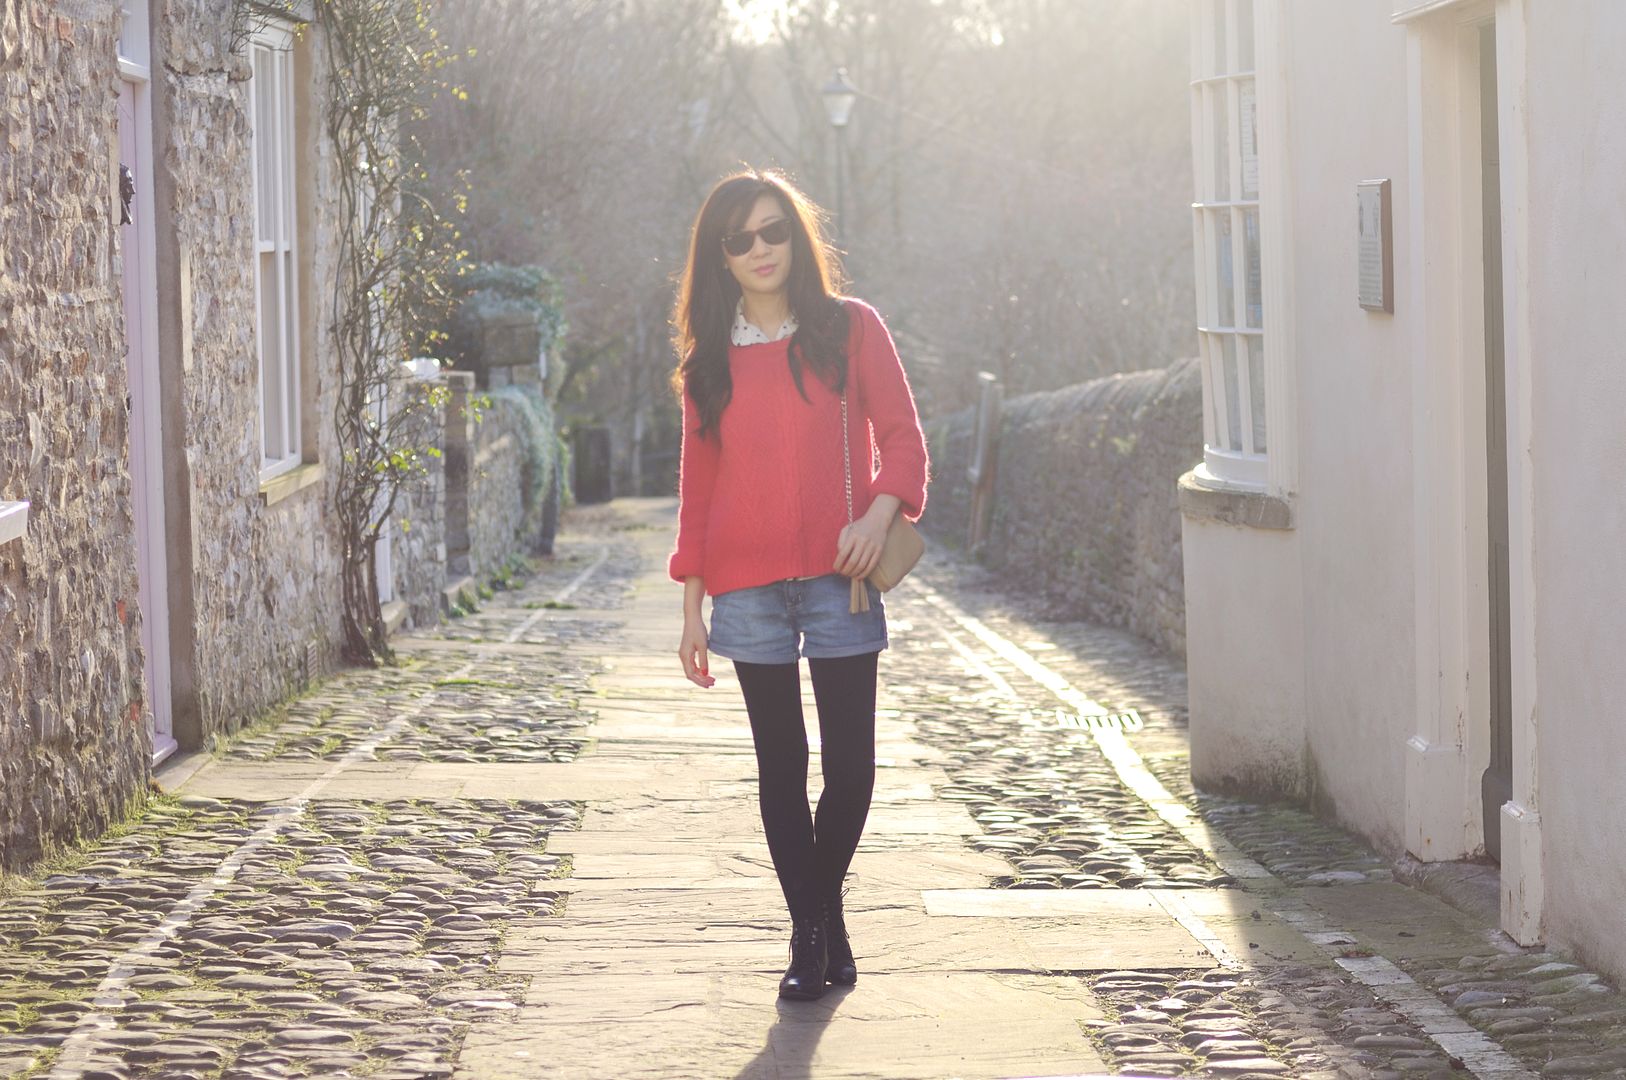 uk fahsion blog, outfit of the day, winter style inspiration